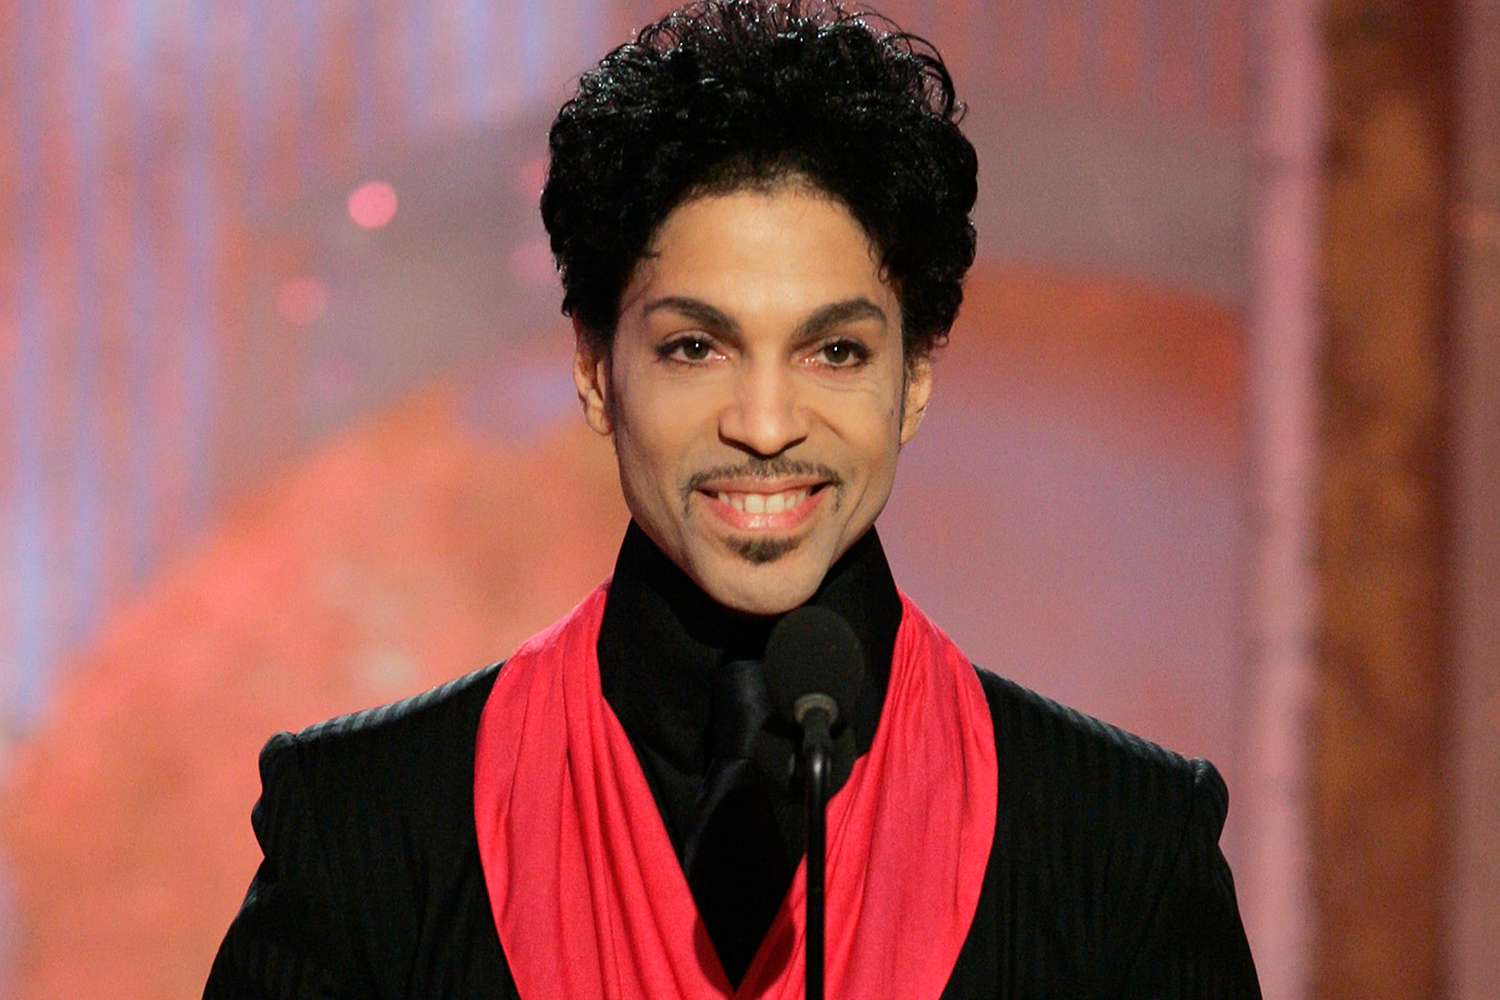 Singer Prince speaks on stage at the 62nd Annual Golden Globe Awards held at the Beverly Hilton Hotel on January 16, 2005